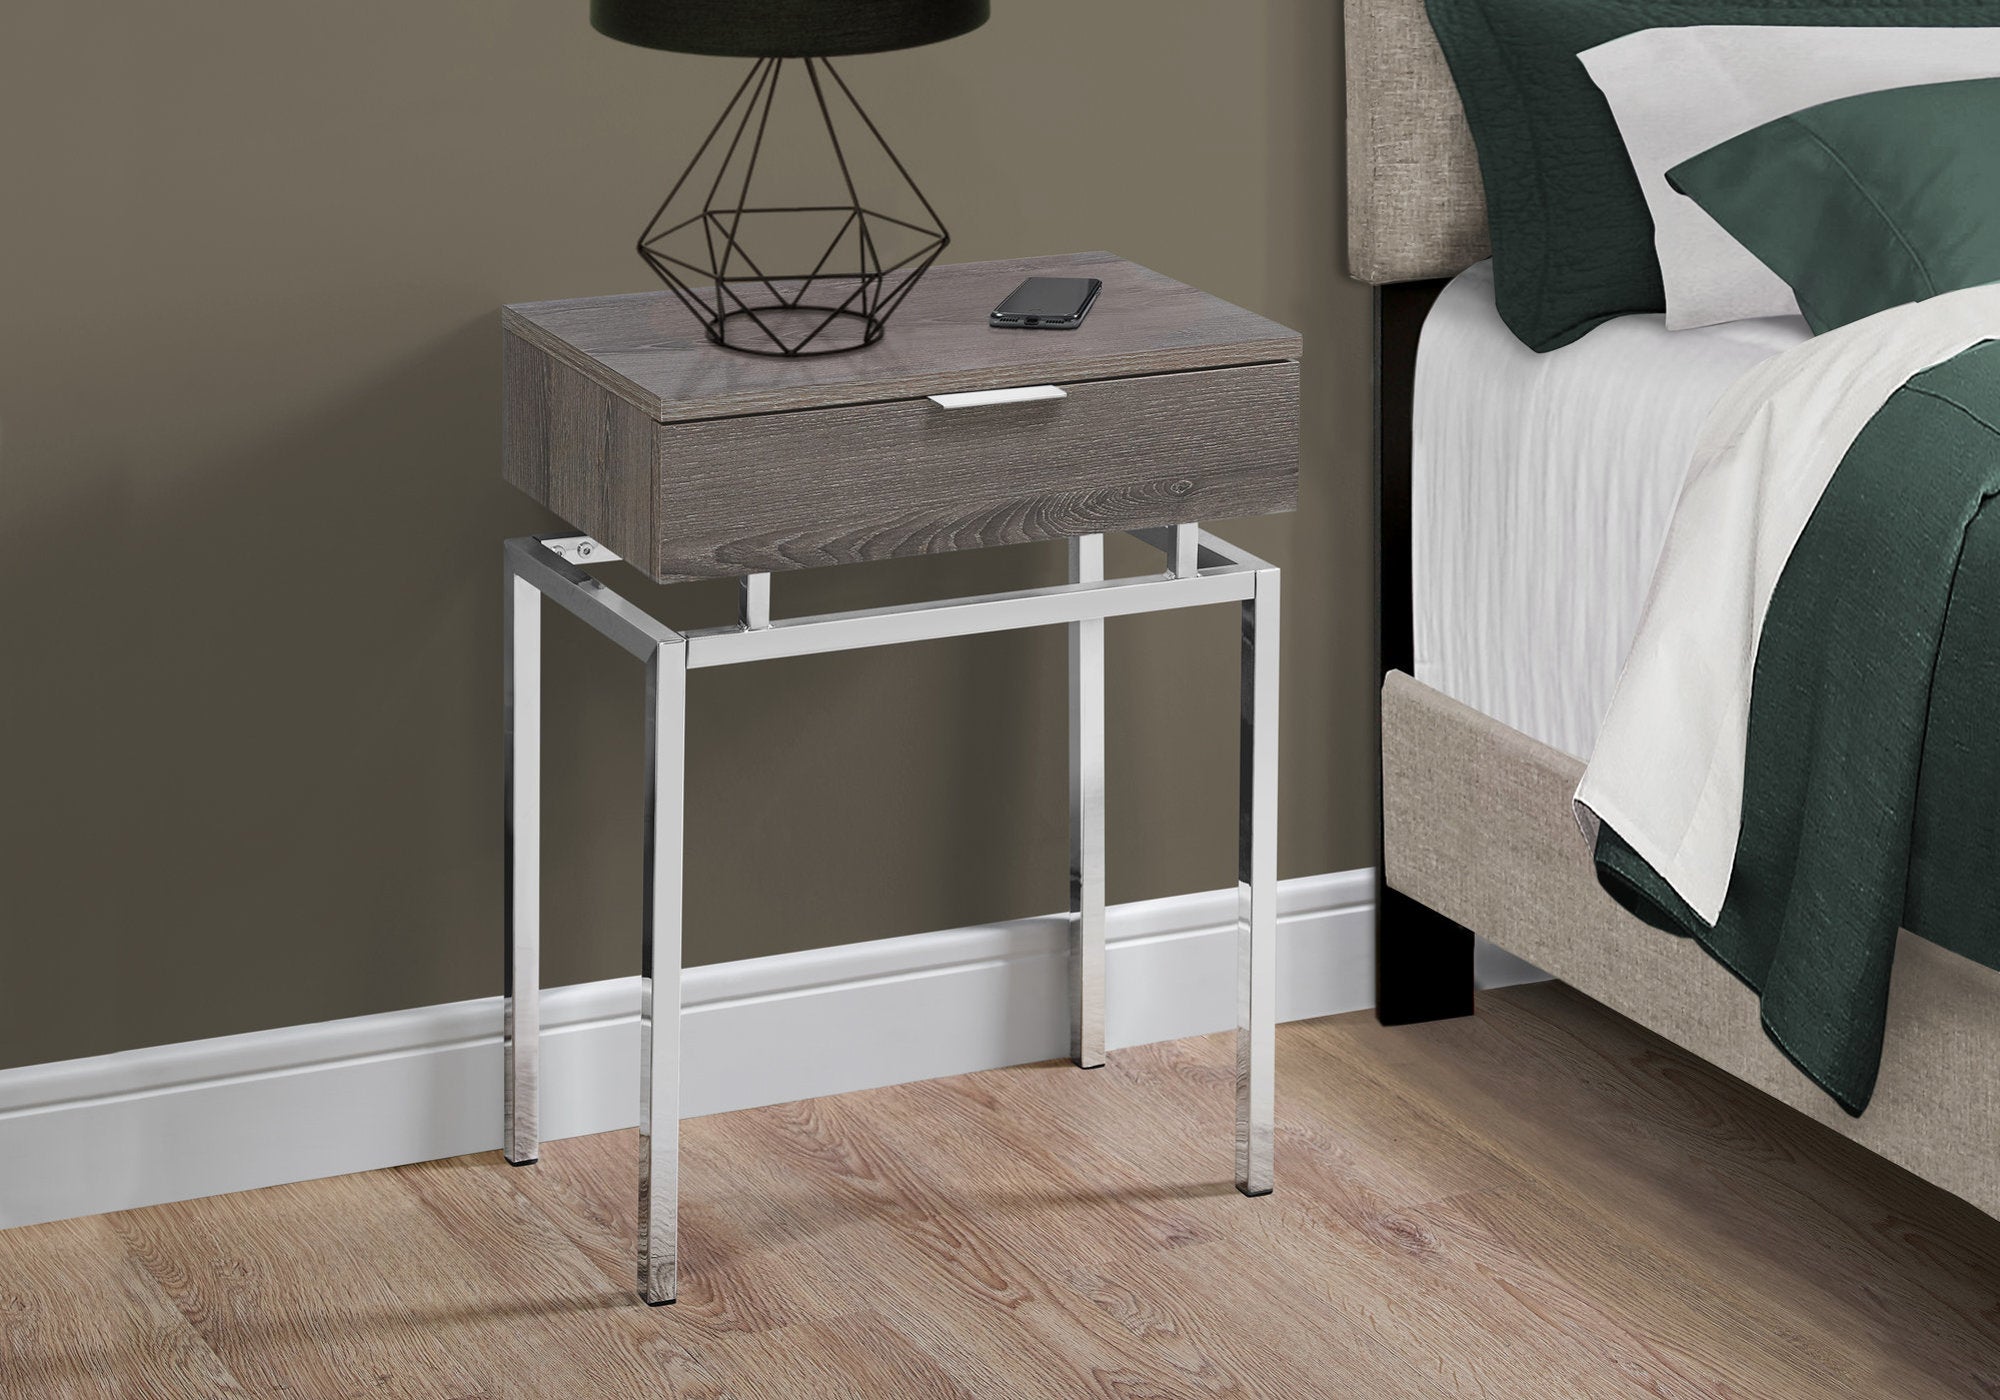 MN-773465    Accent Table, Side, End, Nightstand, Lamp, Living Room, Bedroom, Metal Legs, Laminate, Dark Taupe, Chrome, Contemporary, Modern